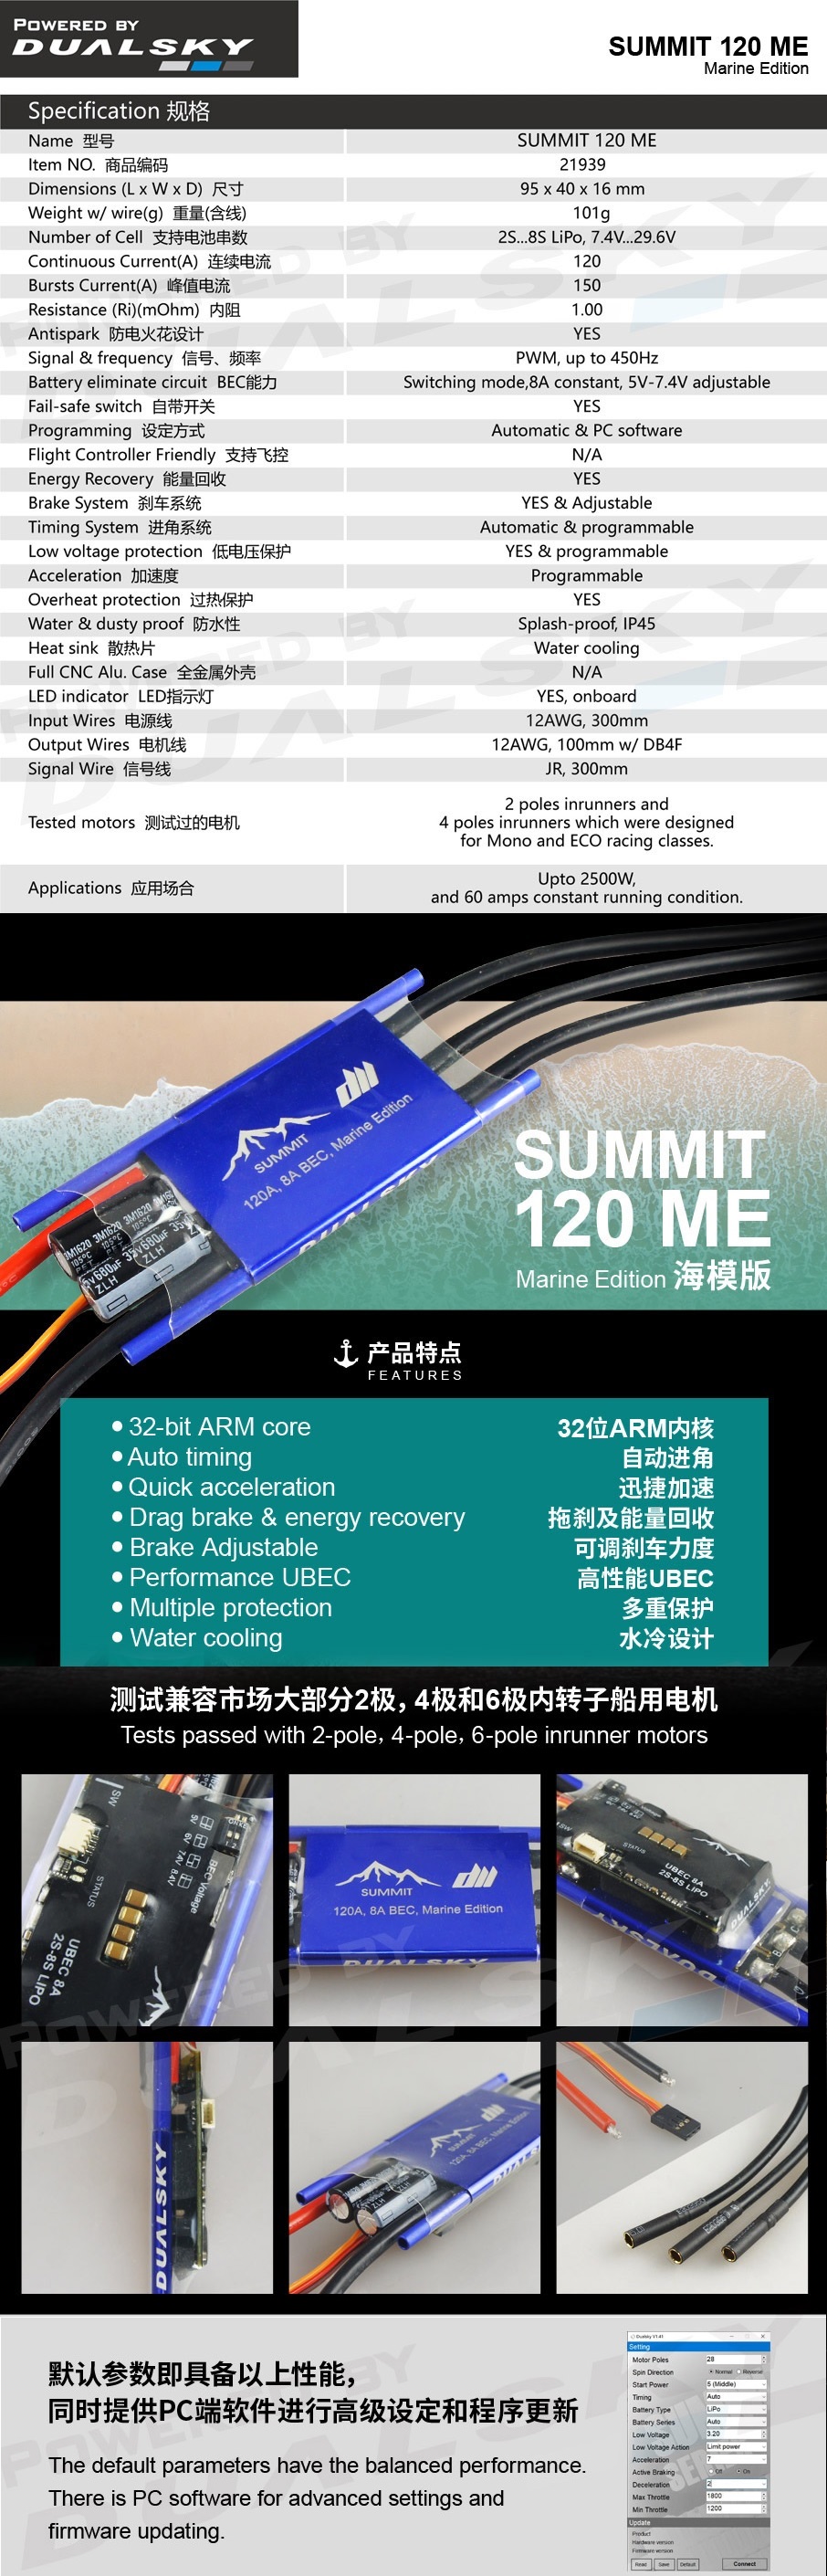 Dualsky Summit 120A ESC Marine Edition for RC Boat